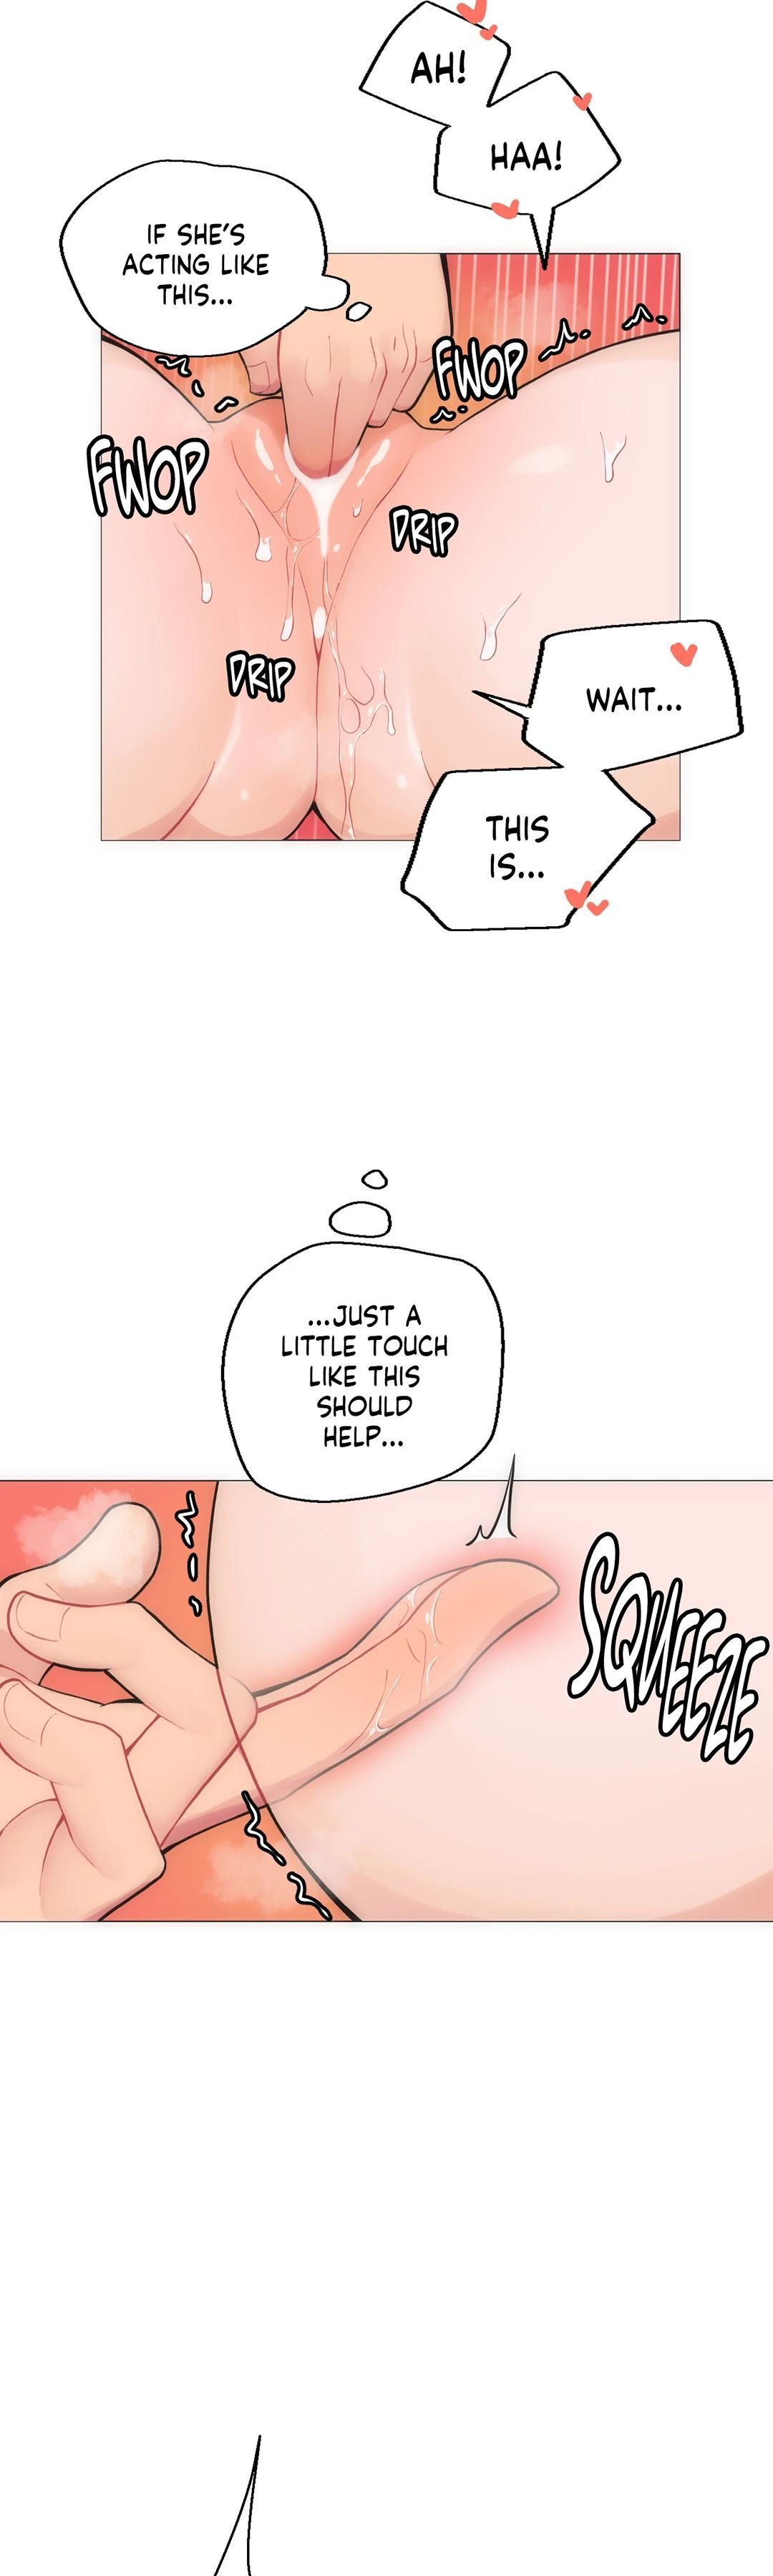 sexcape-room-good-game-chap-3-31